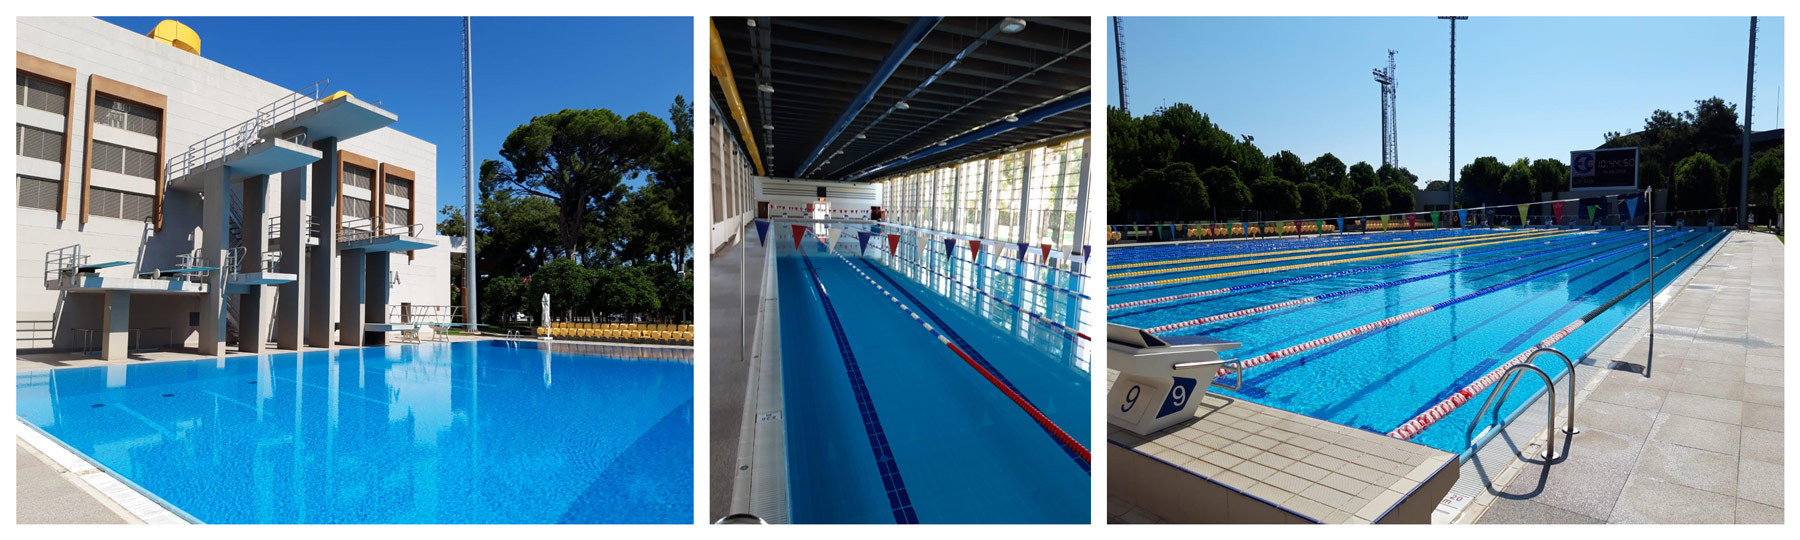 Aquatics is on the agenda for Gloria Sports Arena as they consider expanding the Gloria Cup to other sports ©GSA 